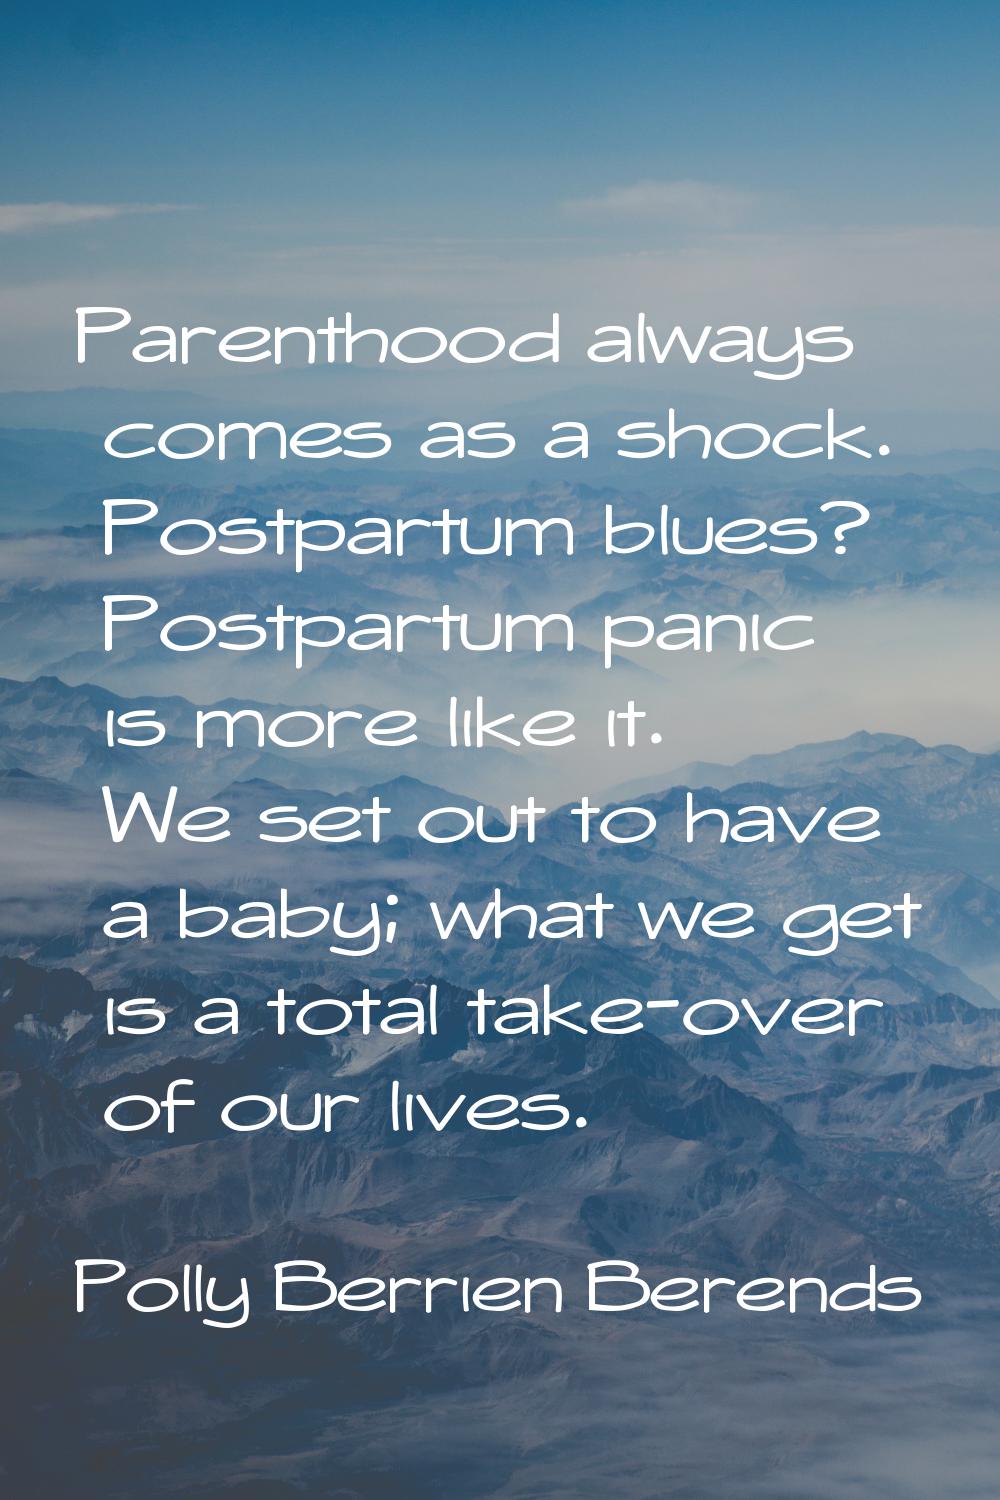 Parenthood always comes as a shock. Postpartum blues? Postpartum panic is more like it. We set out 